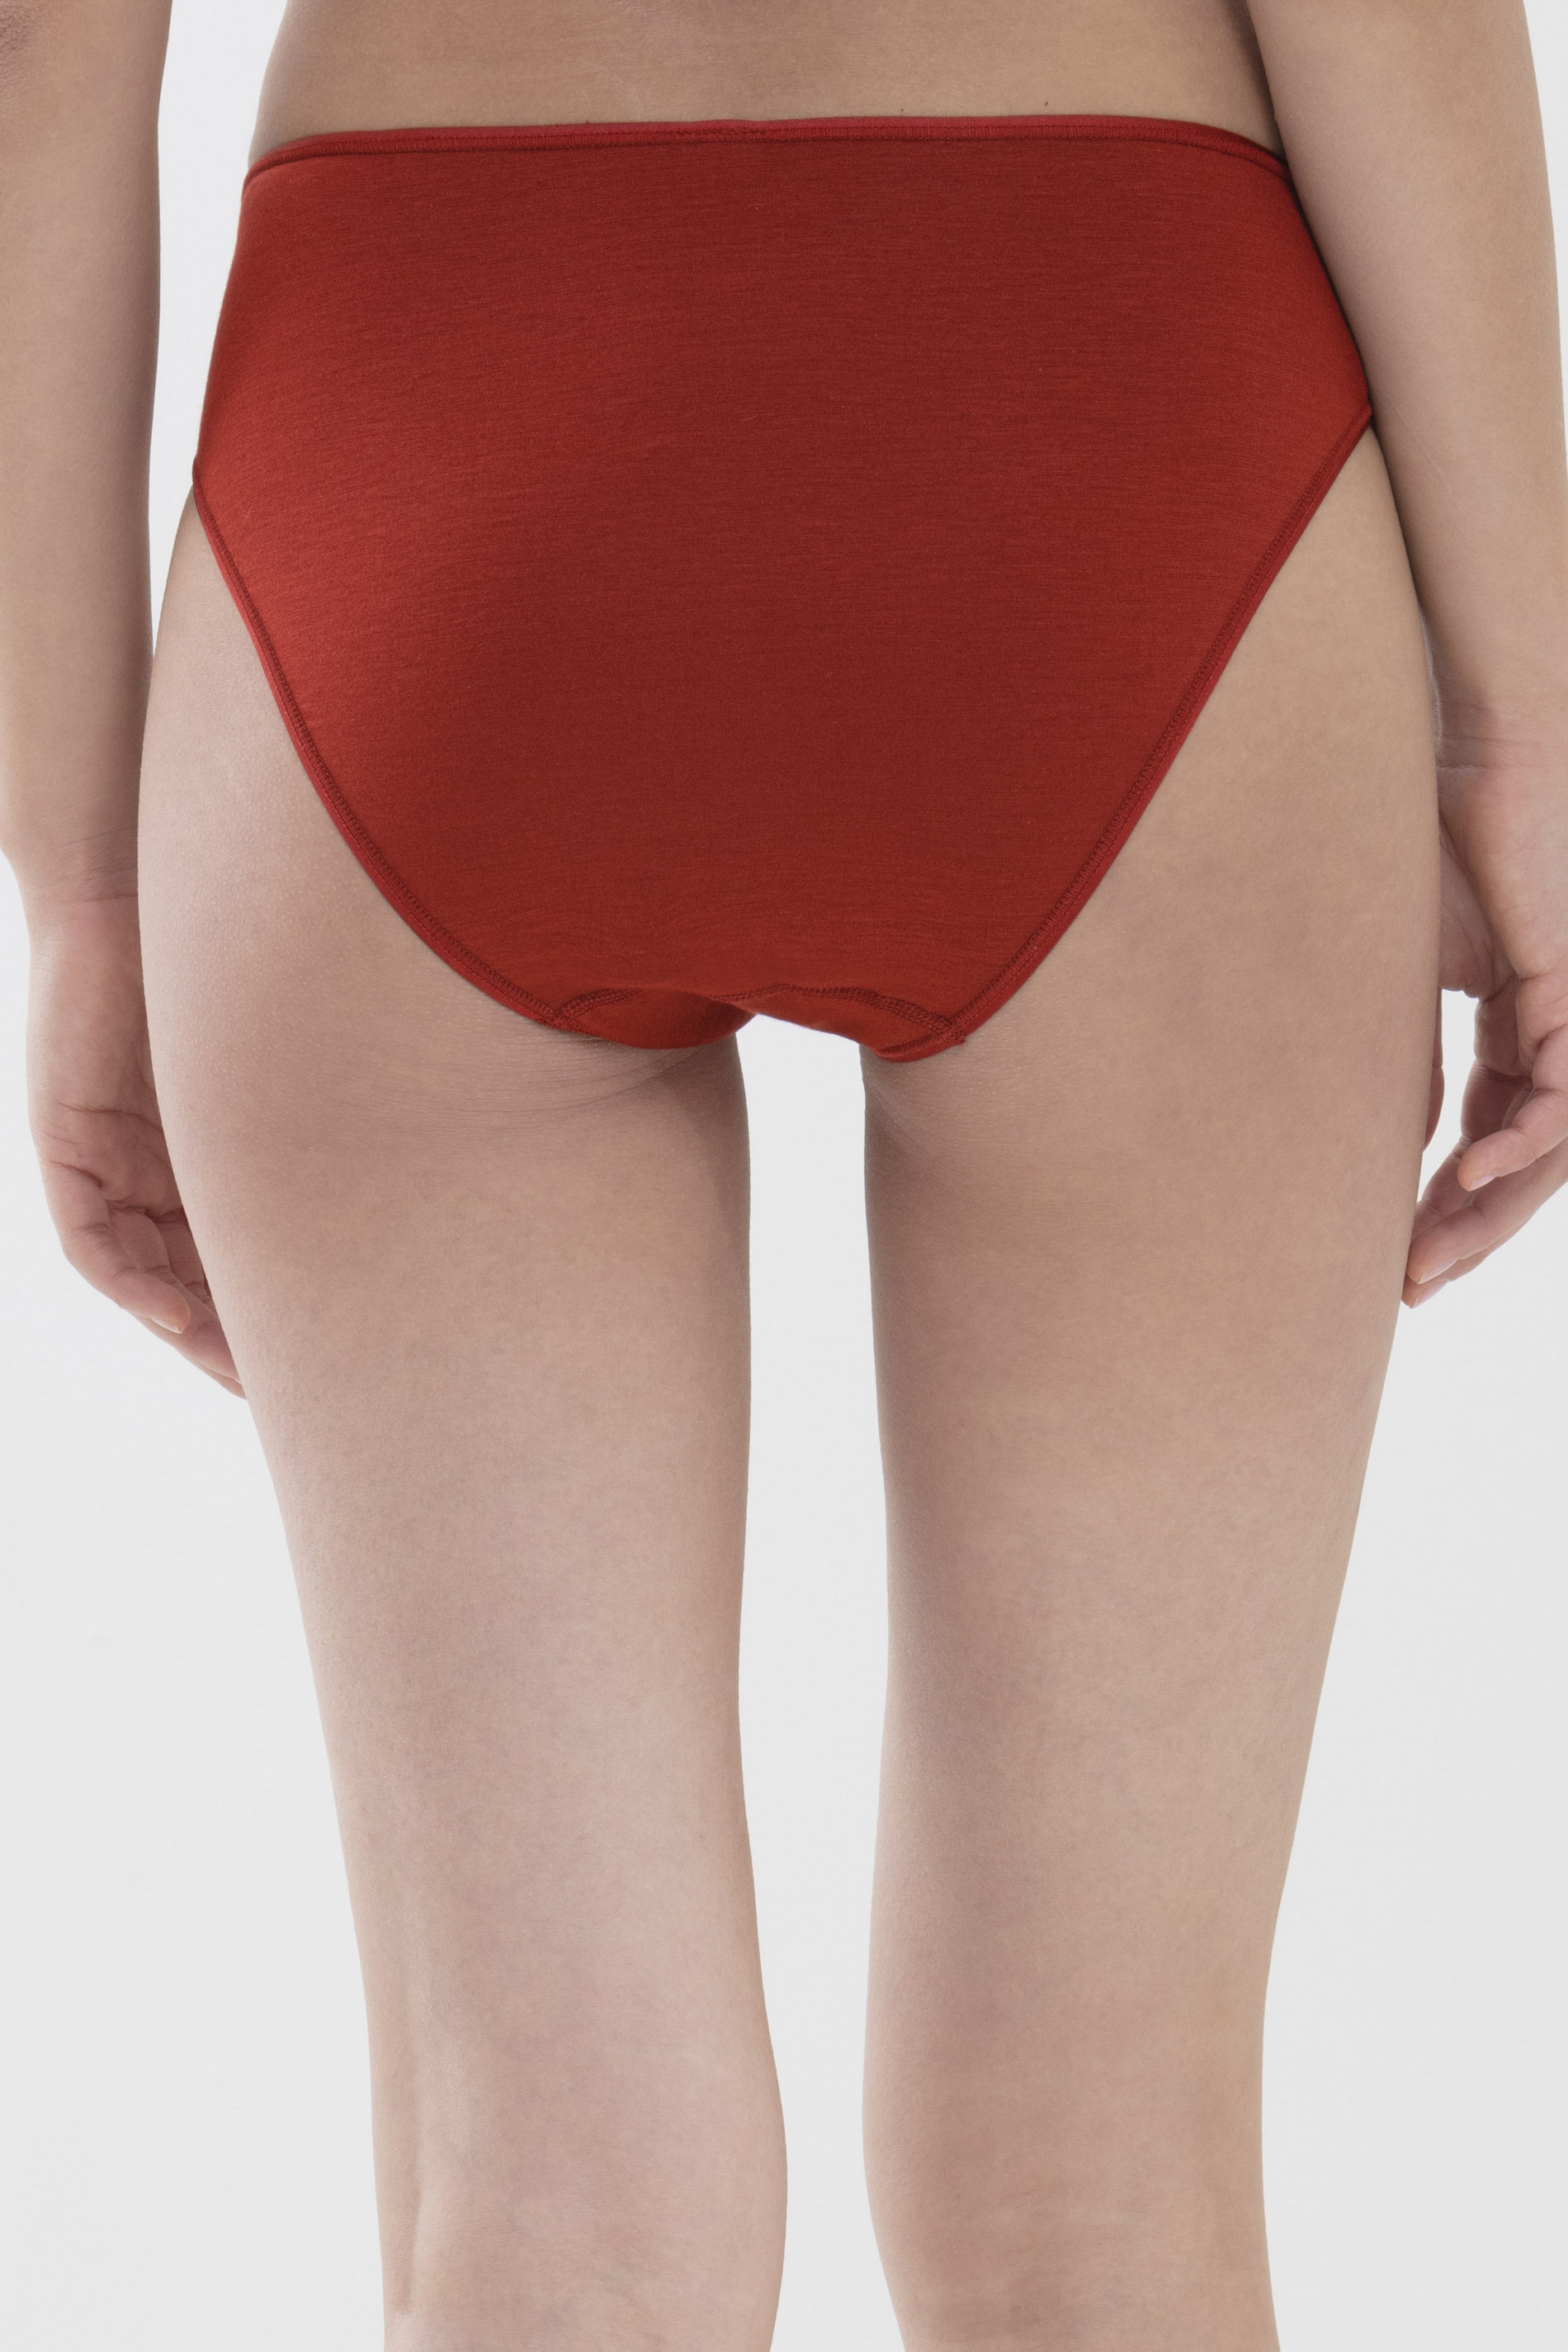 American pants Red Pepper Serie Ilvy Rear View | mey®